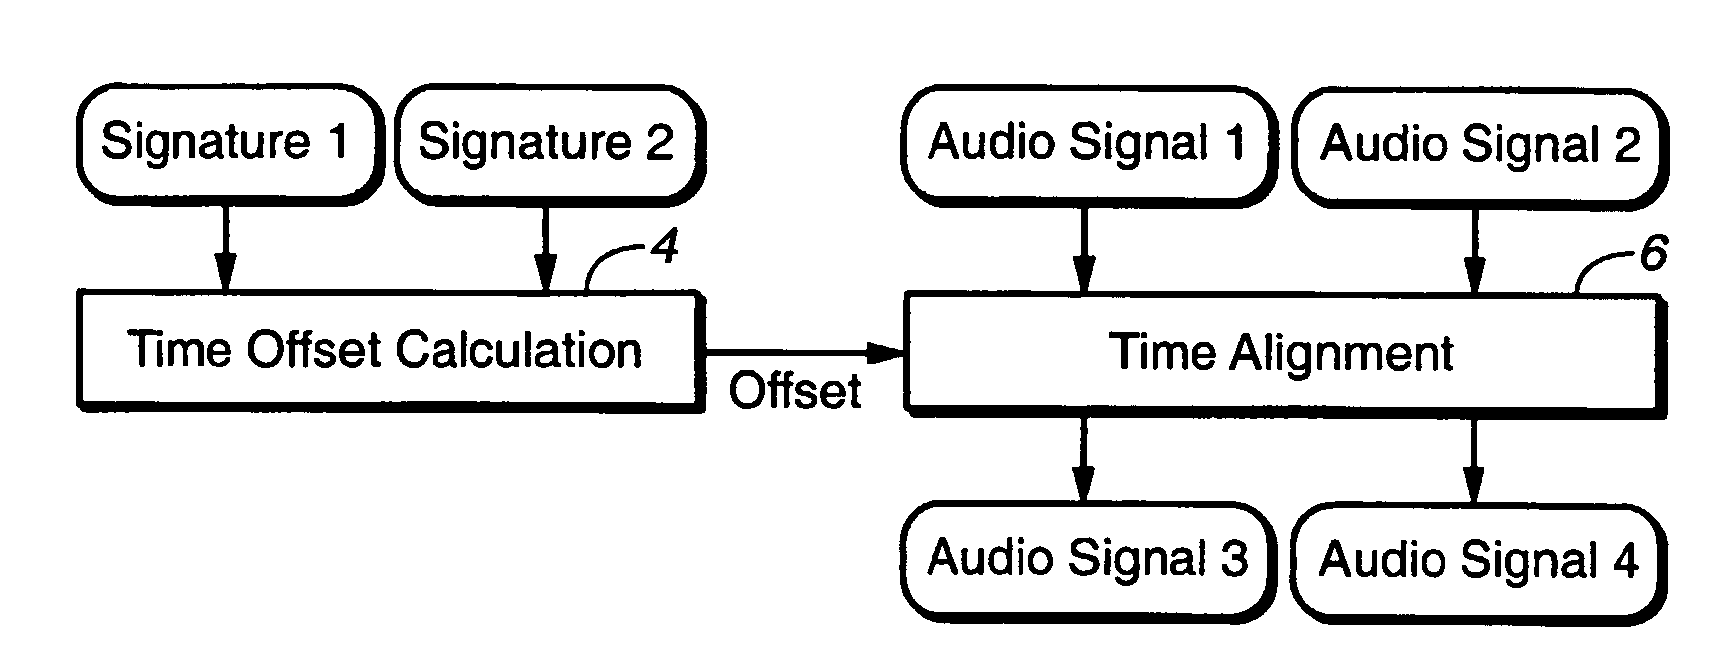 Method for time aligning audio signals using characterizations based on auditory events